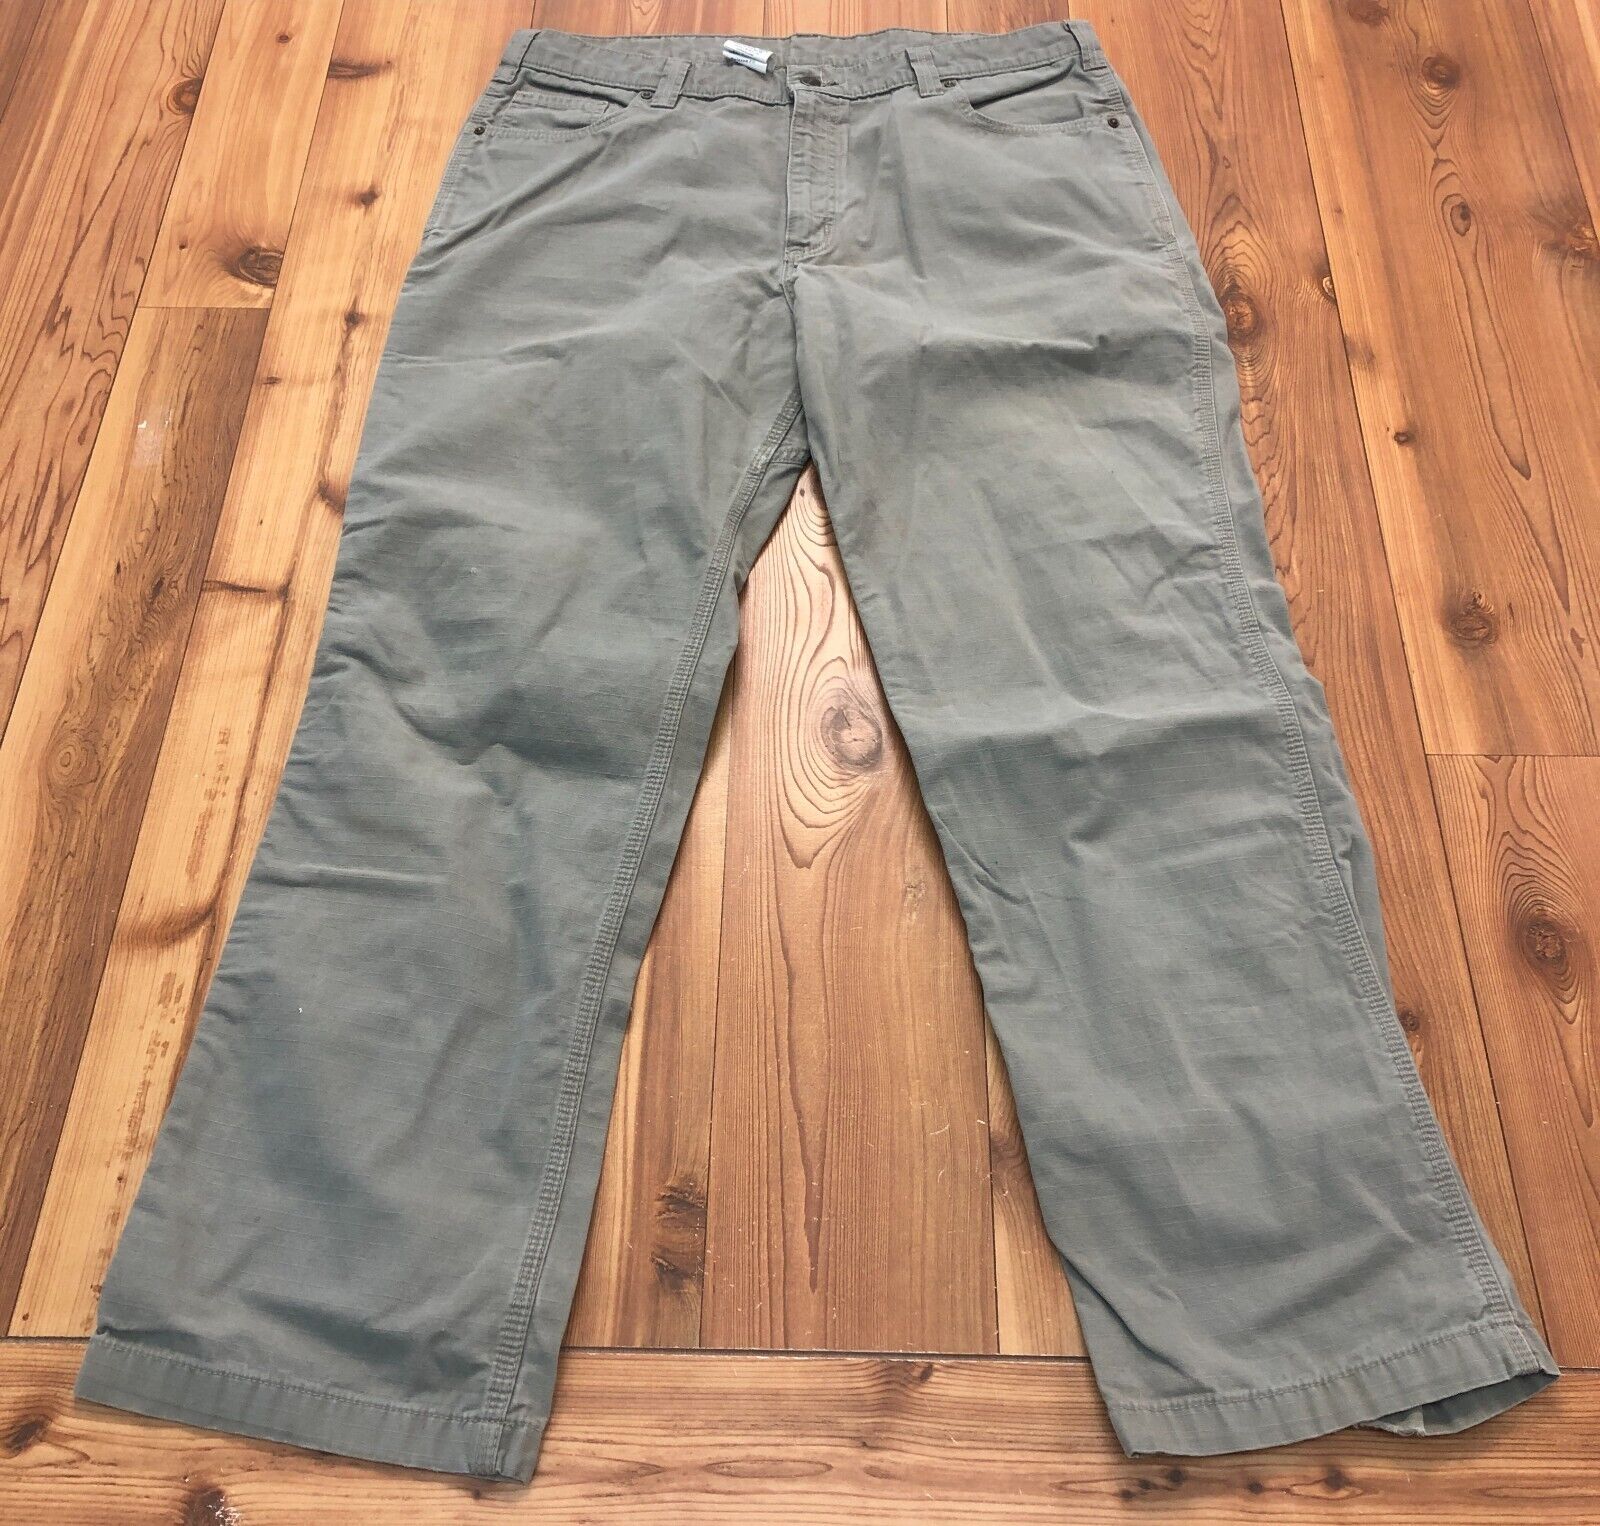 Carhartt Olive Green Relaxed Fit Straight Leg Flat Front Work Pants Men Size 38W